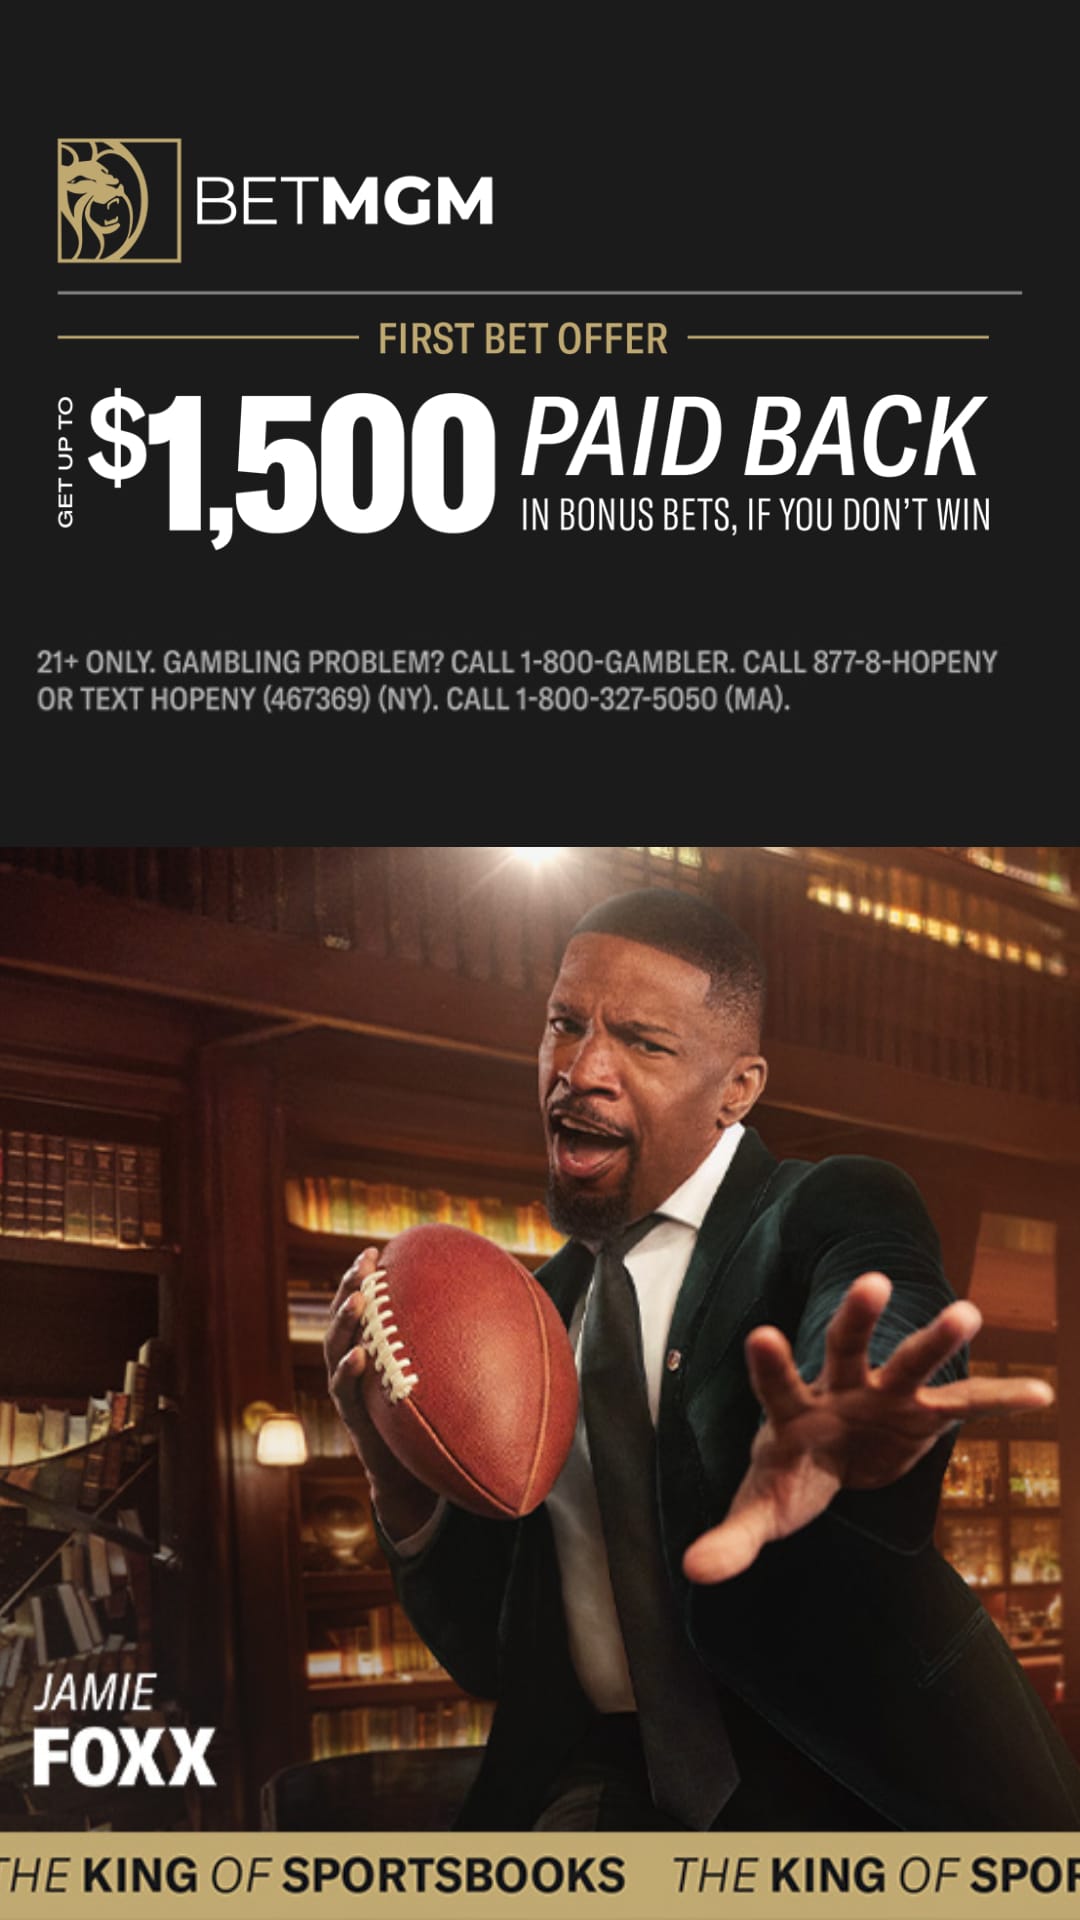 Actor Jamie Foxx on the $1500 Welcome Offer BetMGM's banner.